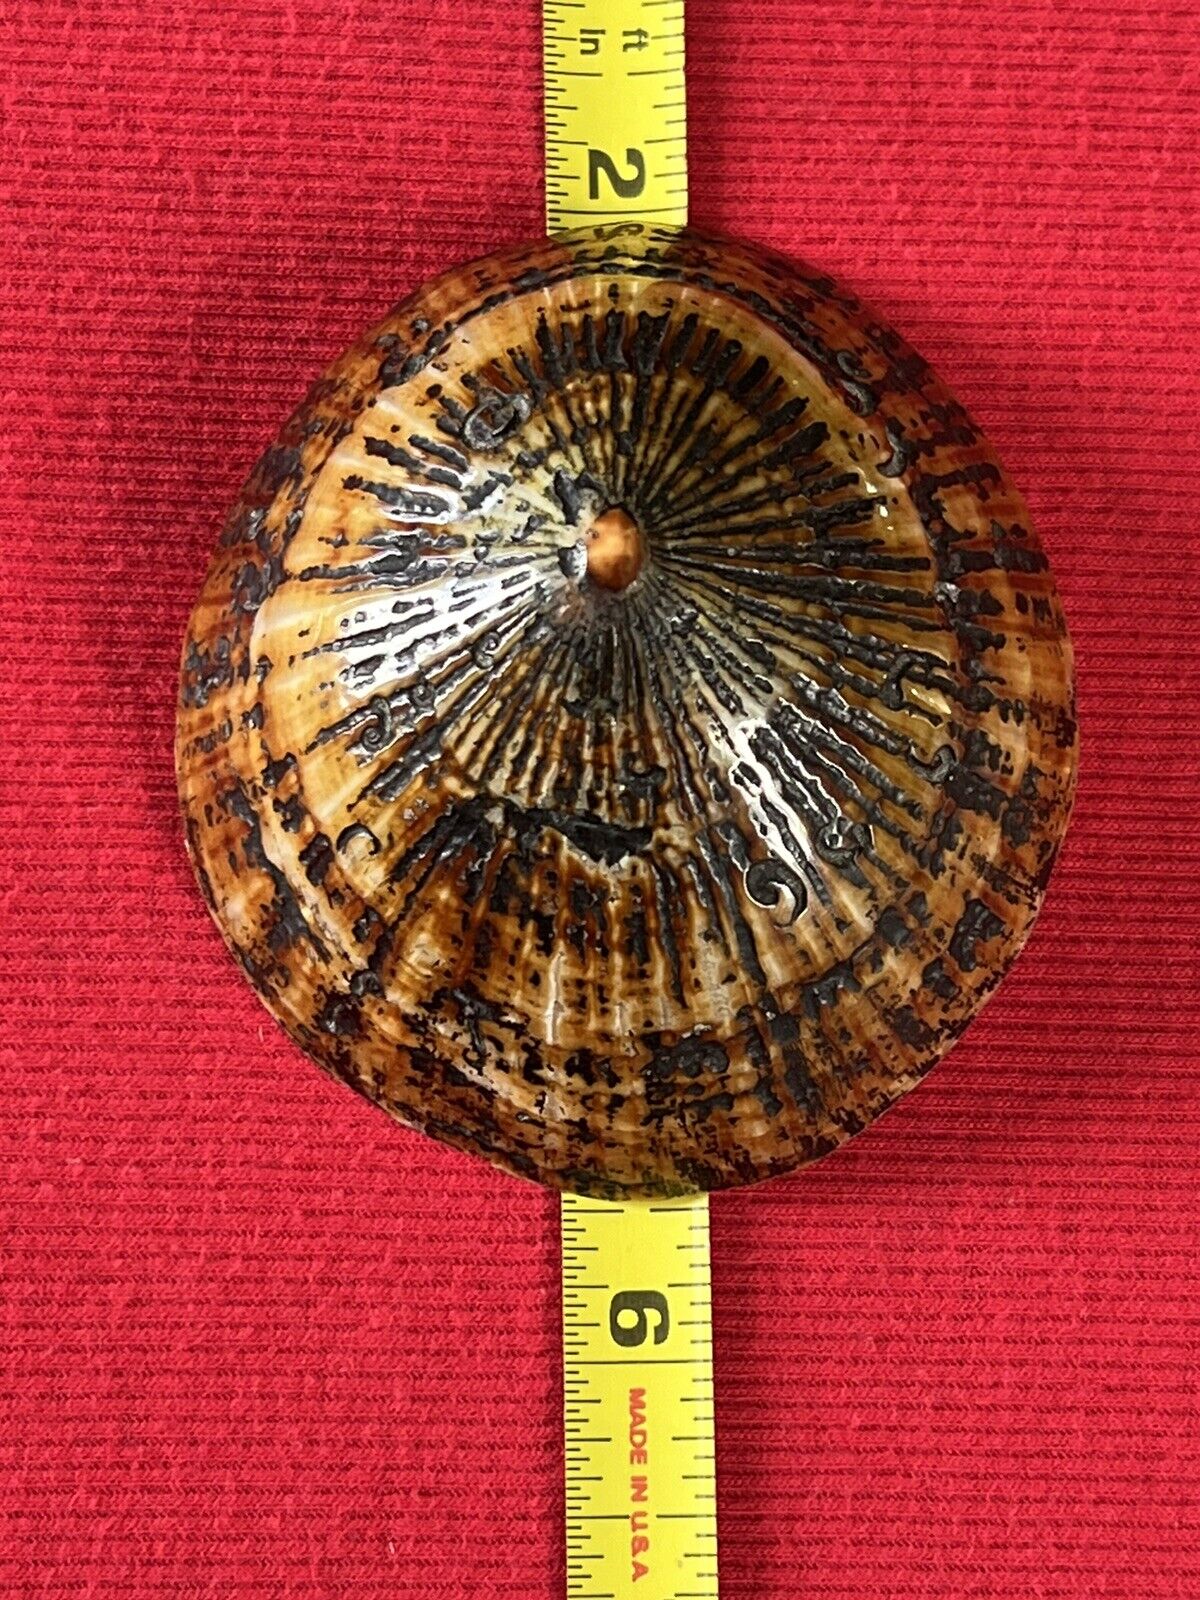 Unique Extra Large Polished Hawaiian Opihi Limpet shell